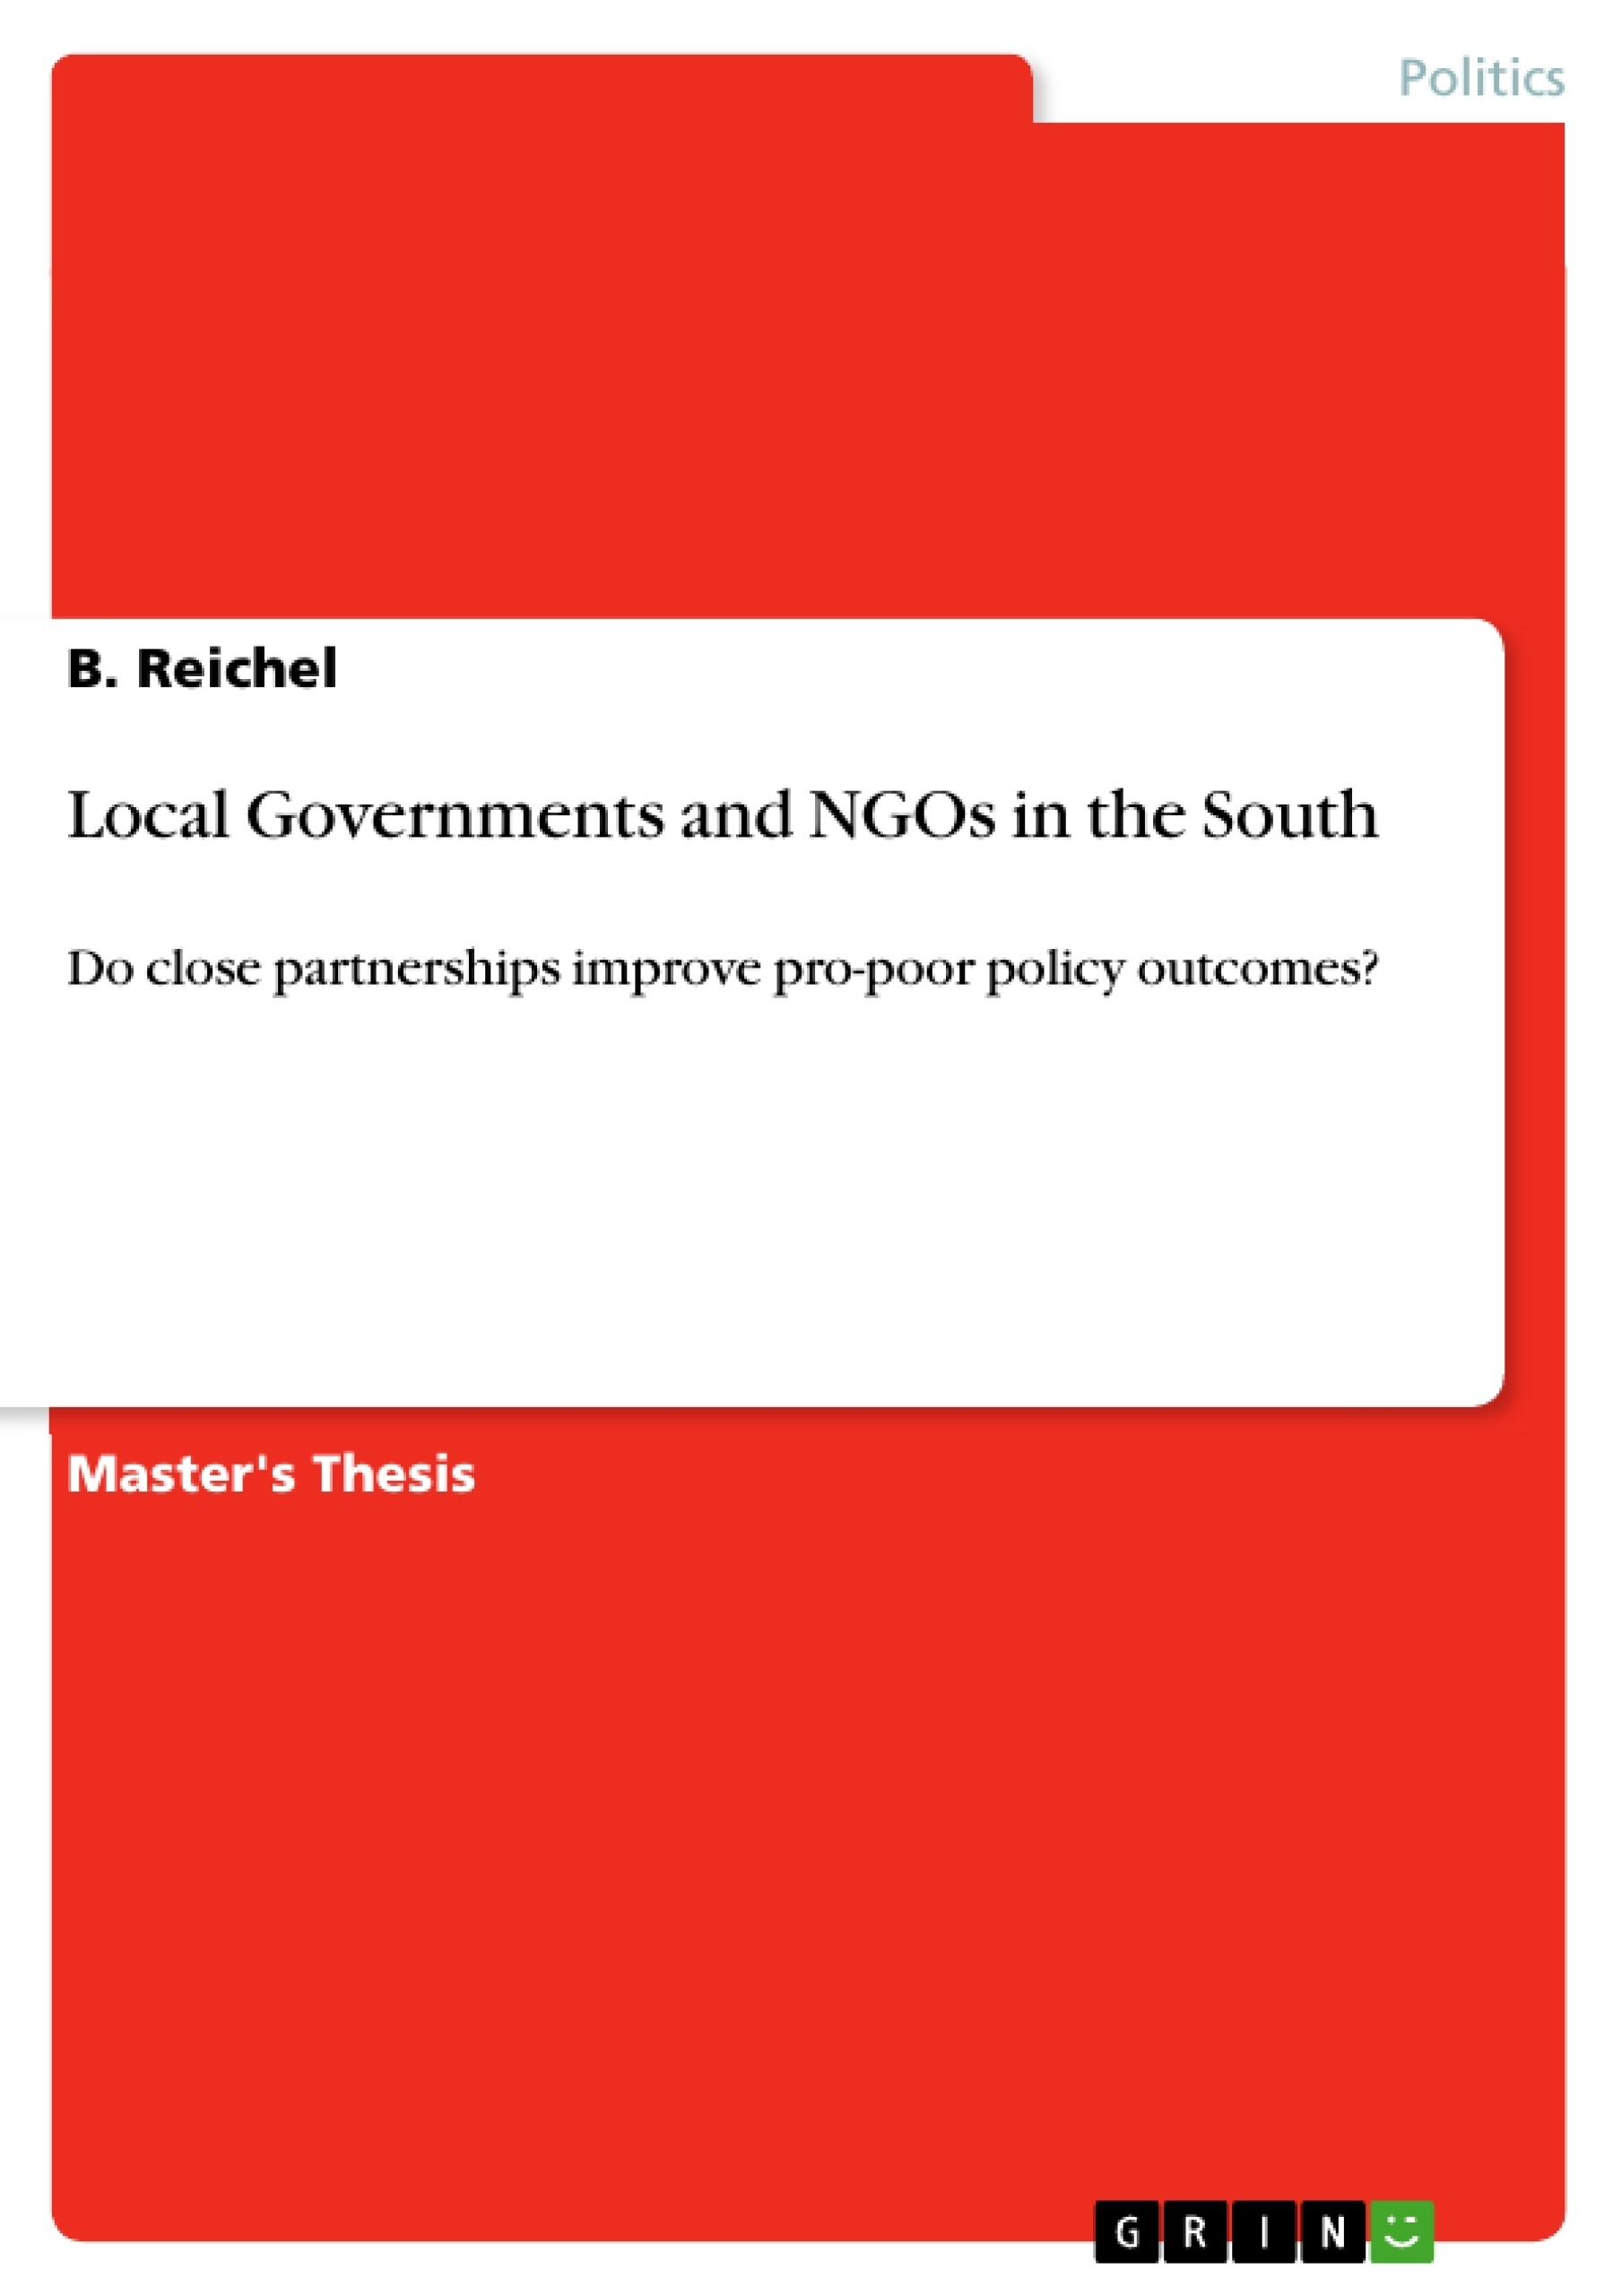 Title: Local Governments and NGOs in the South